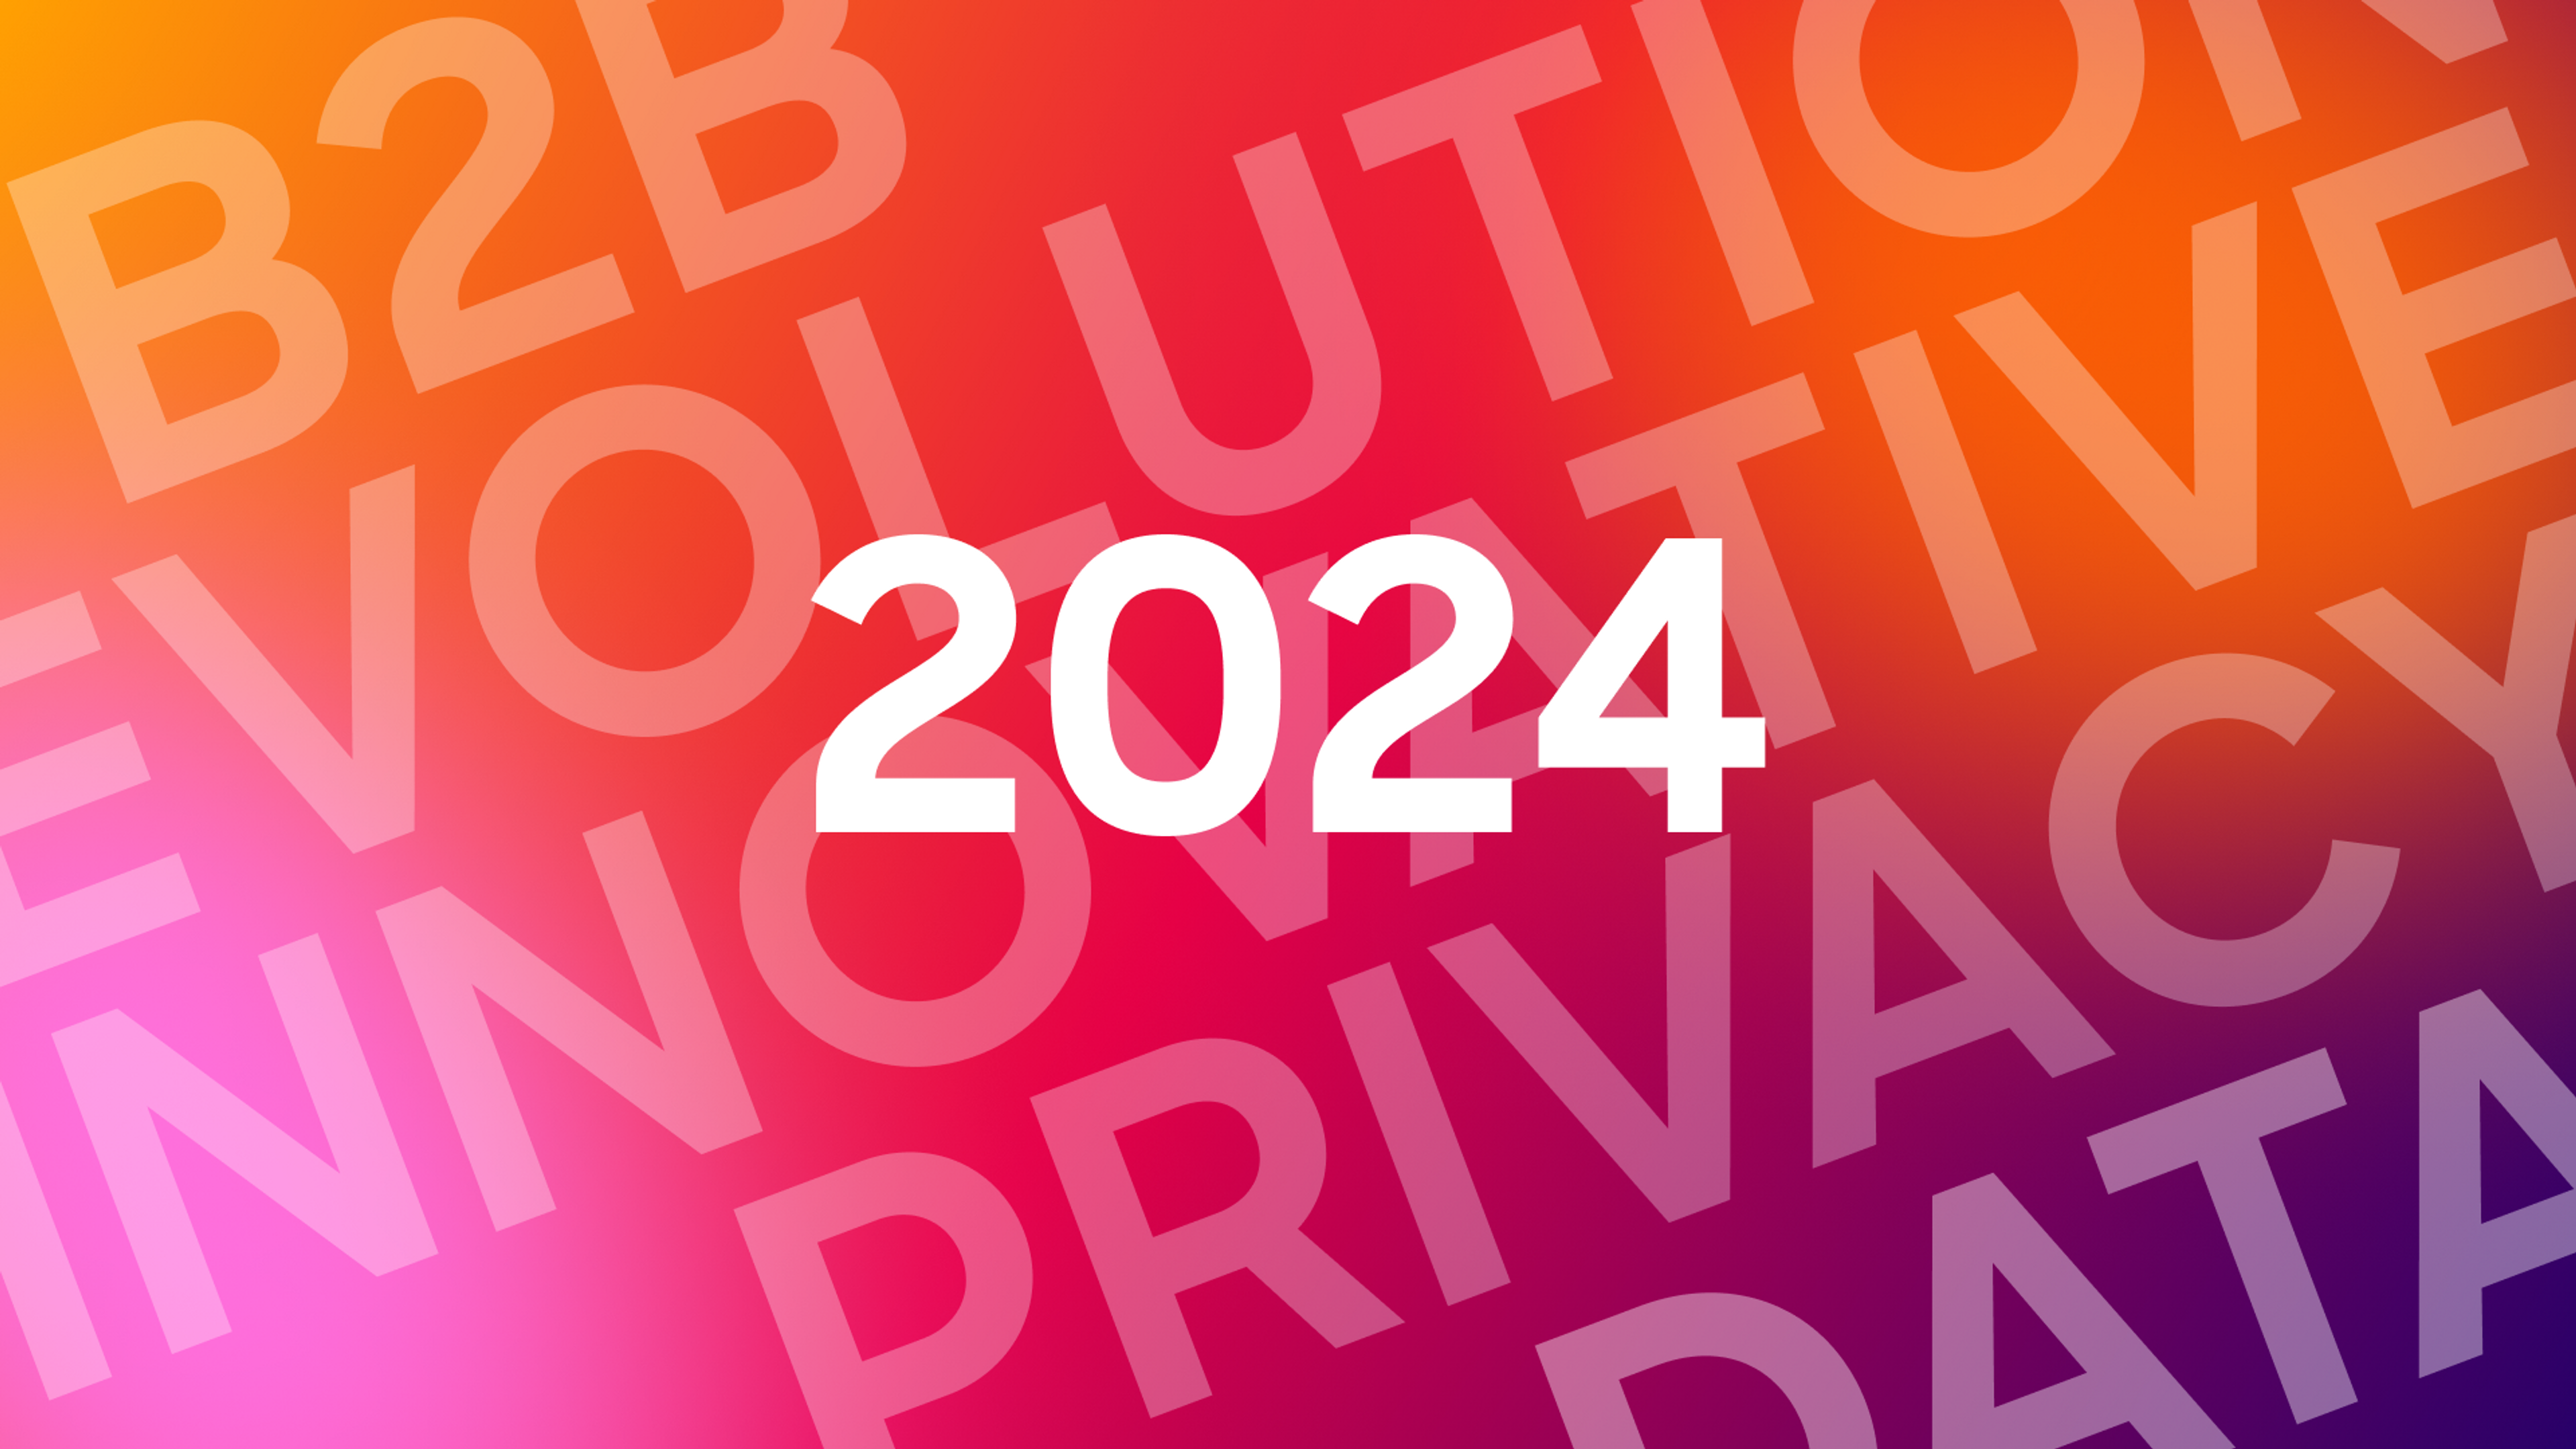 B2B Evolution and Privacy Data in the background - a representation of the changing landscape of business-to-business relationships and data protection.